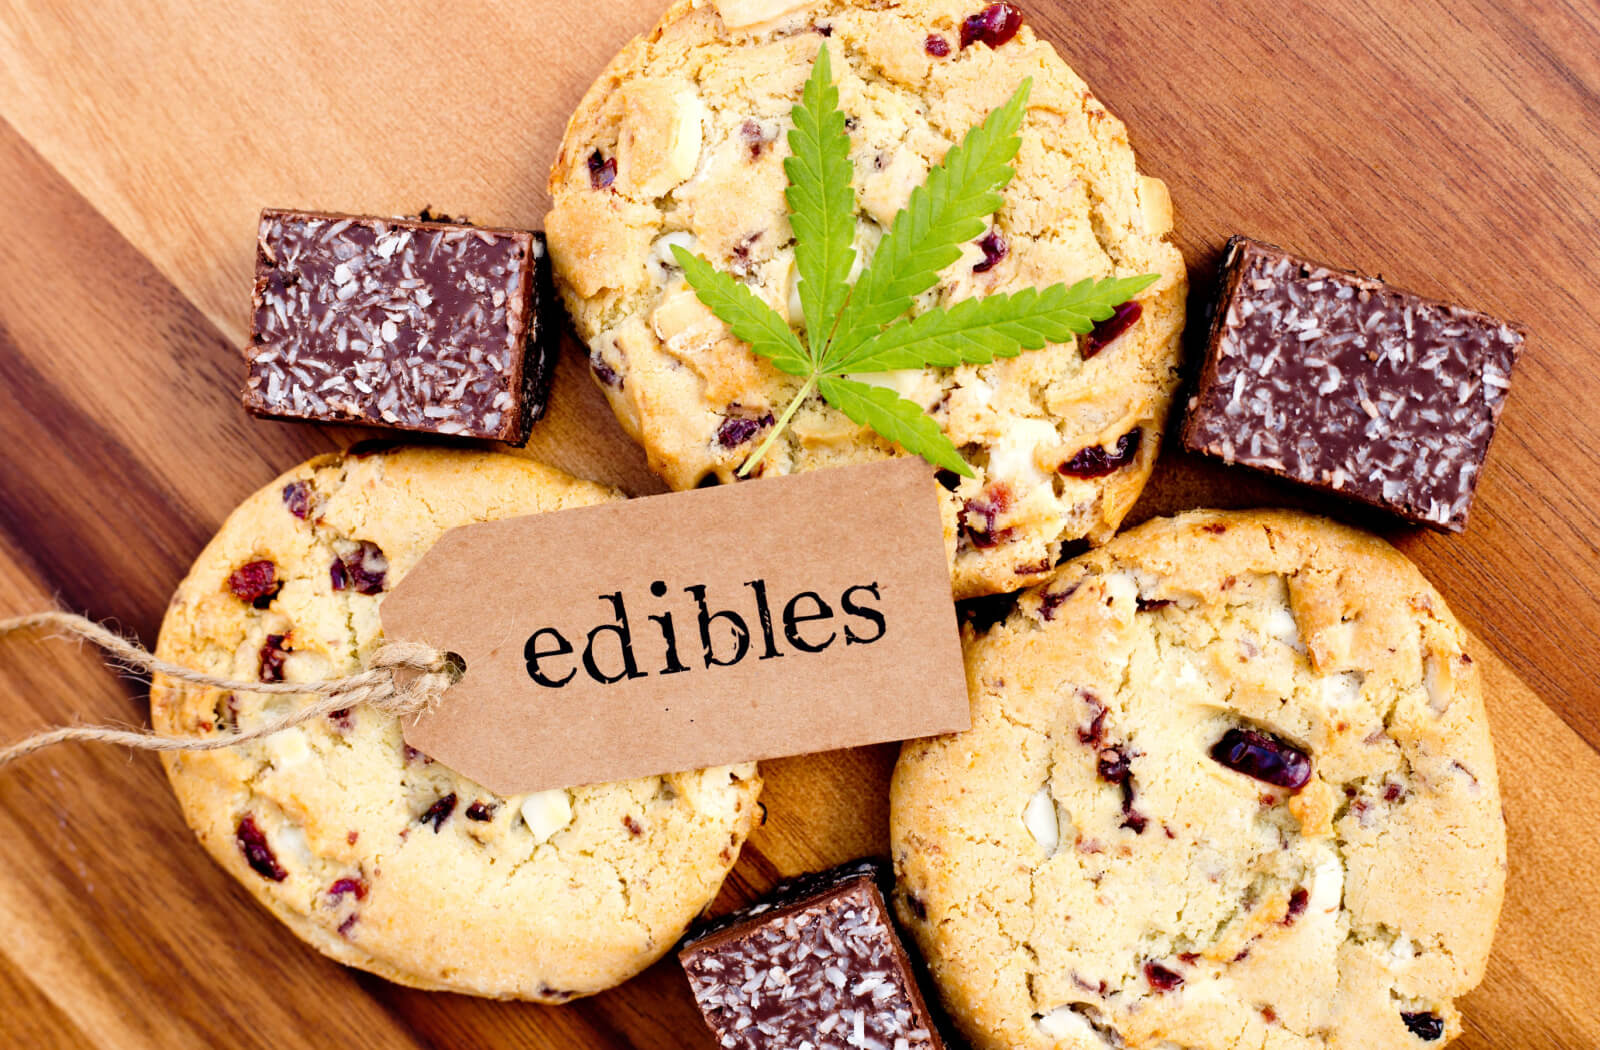 Marijuana Cookies: Effects, Safety, and Everything You Need to